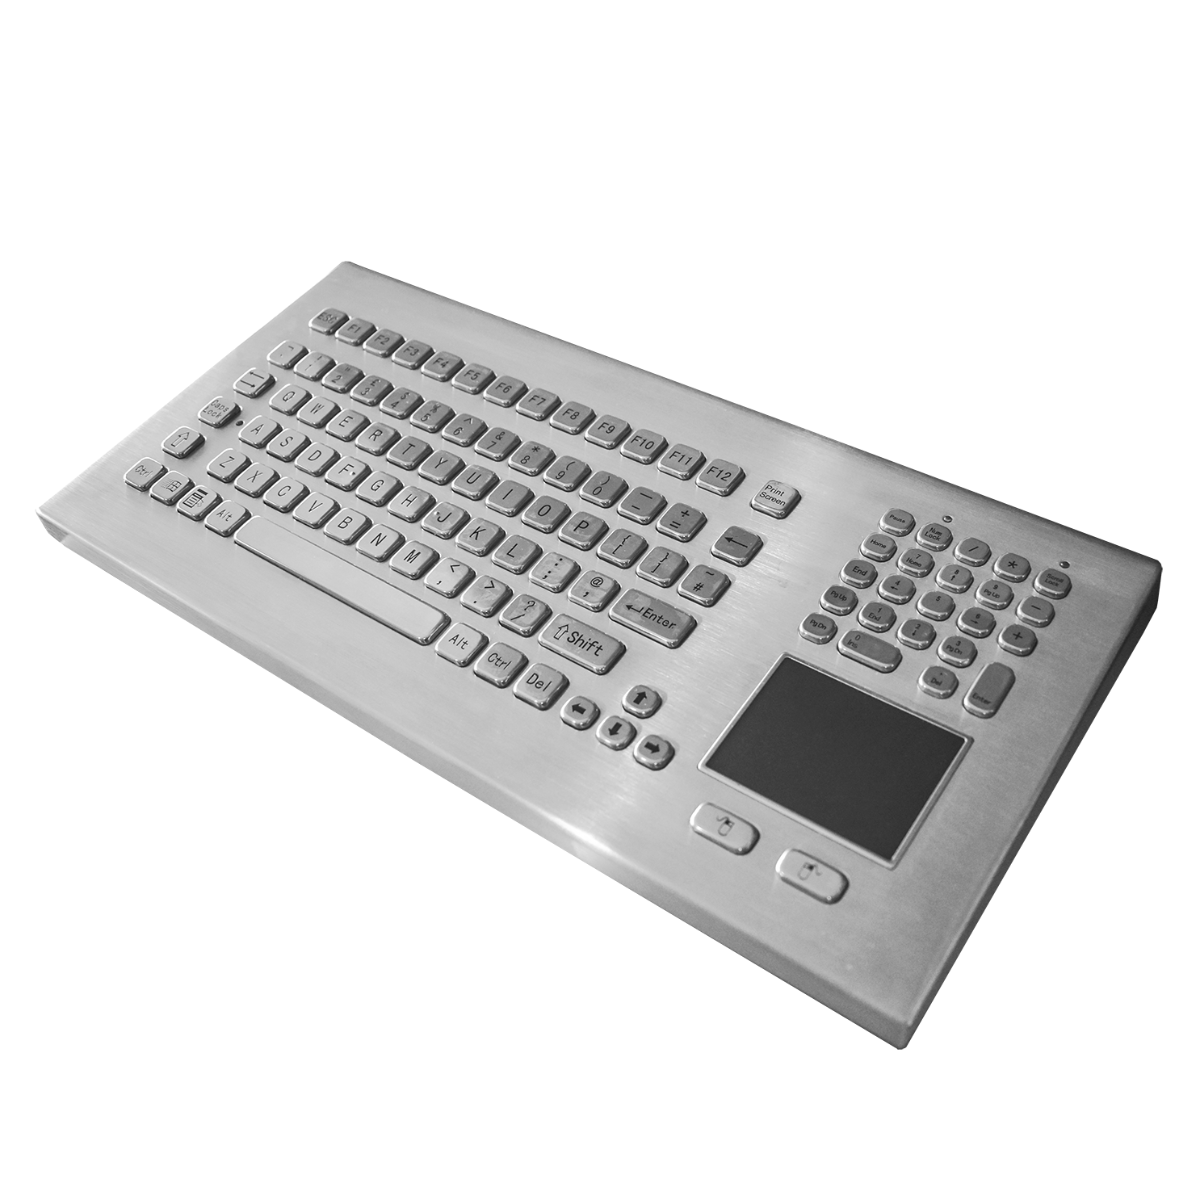 Stainless steel computer keyboard with optional touchpad